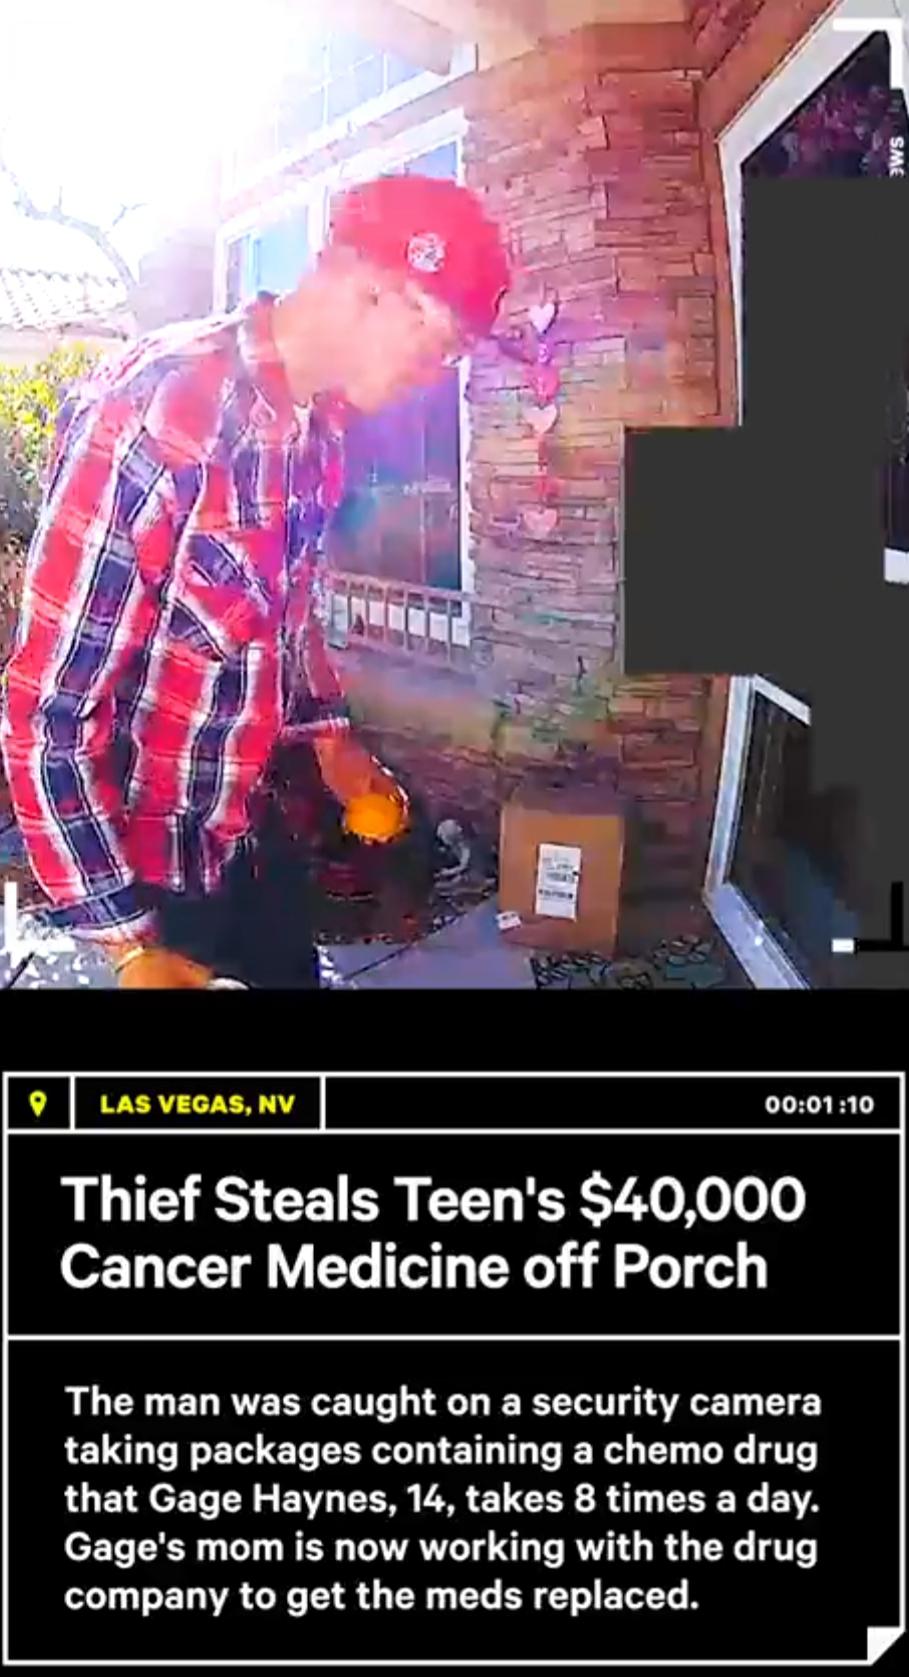 I Sme Las Vegas, Nv 10 Thief Steals Teen's $40,000 Cancer Medicine off Porch The man was caught on a security camera taking packages containing a chemo drug that Gage Haynes, 14, takes 8 times a day. Gage's mom is now working with the drug company to get…